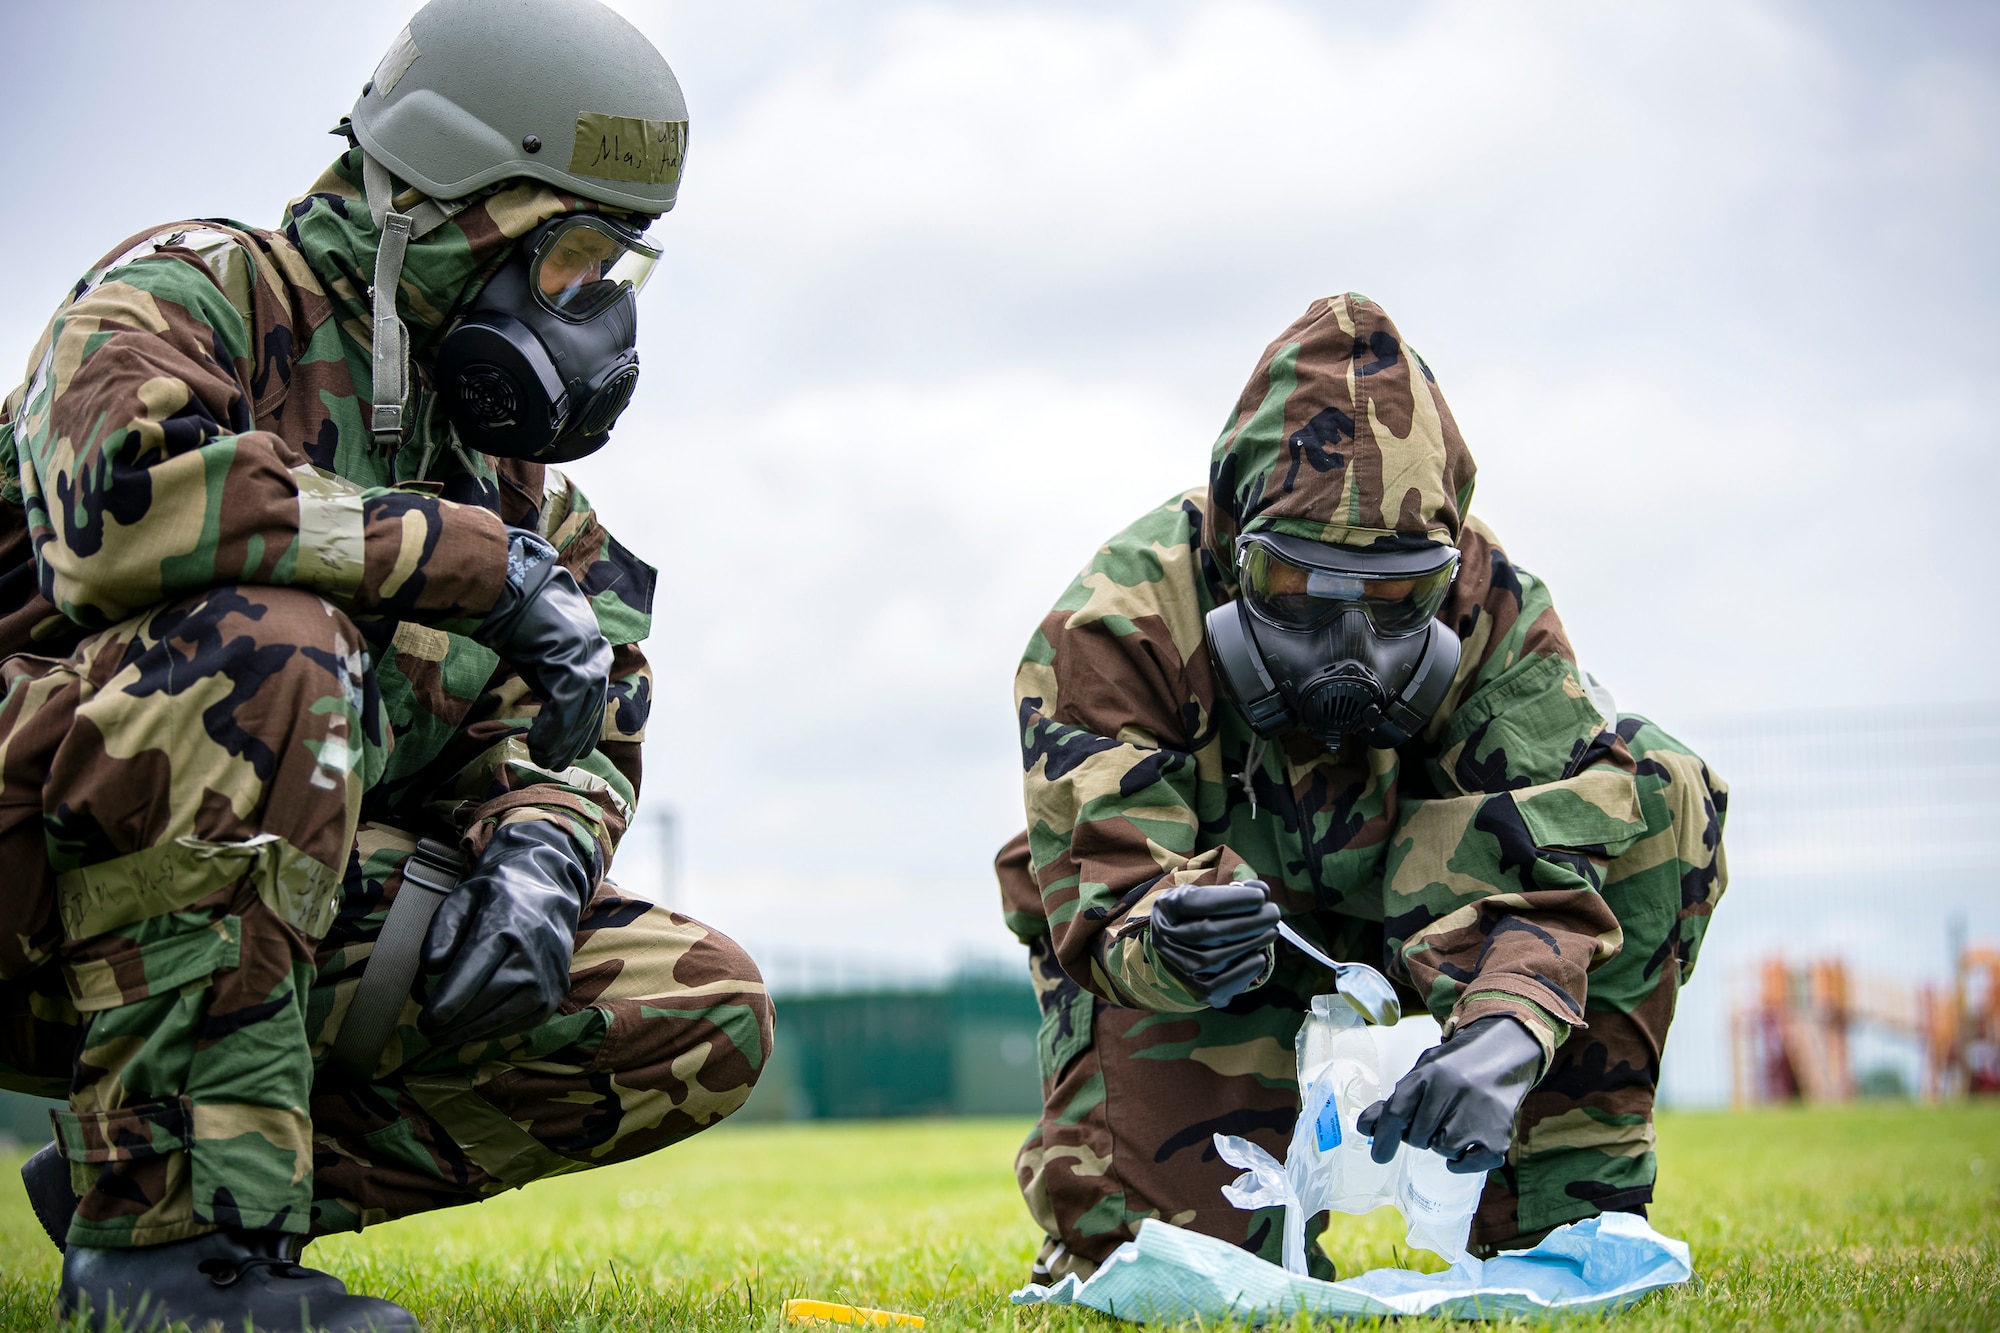 Staff Sgt. Naujy Serrano, right, 423d Civil Engineer Squadron emergency management NCO in charge of plans and operations, prepares to collect a soil sample from a simulated contaminated area during an exercise at RAF Alconbury, England, May 19, 2022. The exercise was geared towards training Airmen on how to properly control and examine a contaminated area after a simulated chemical attack while in Mission Oriented Protective Posture Gear. (U.S. Air Force photo by Staff Sgt. Eugene Oliver)